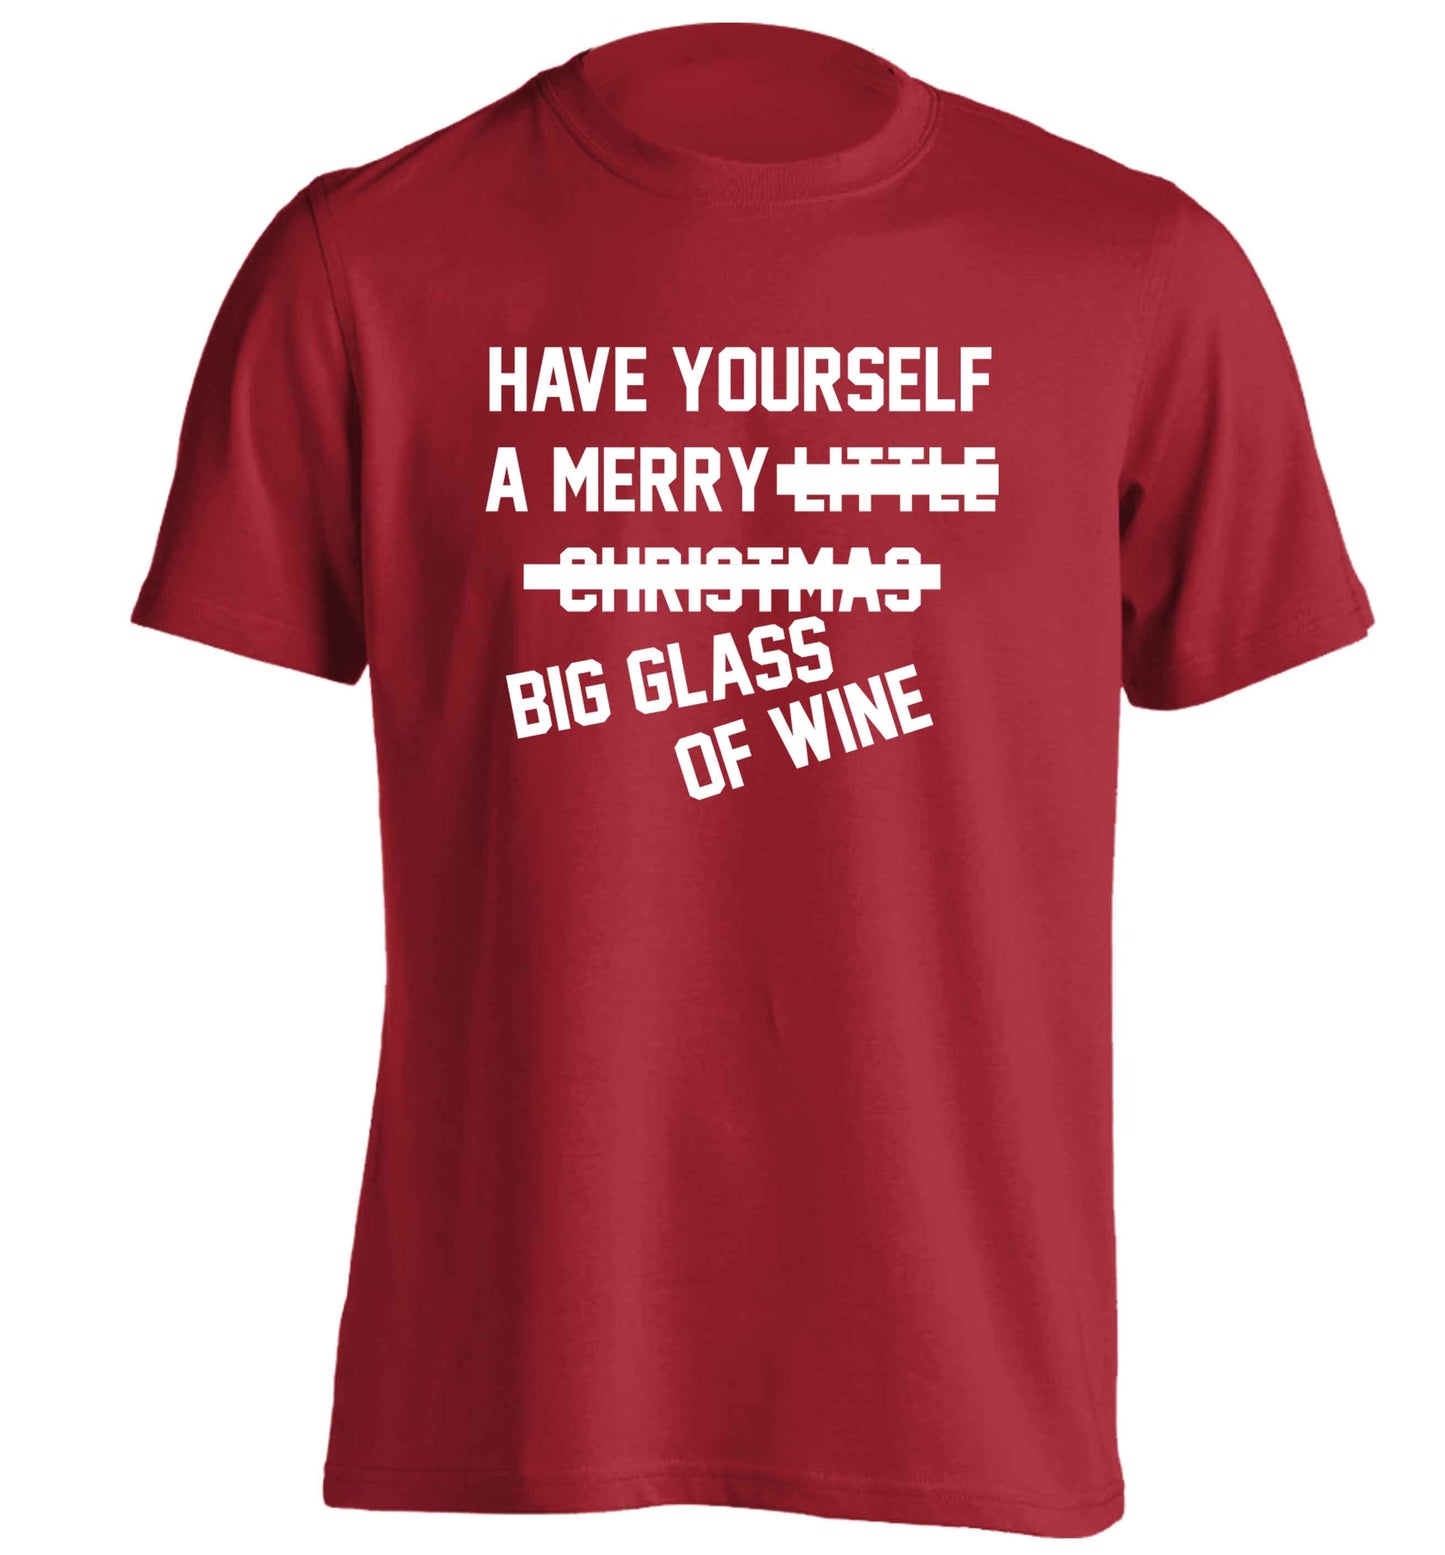 Have yourself a merry big glass of wine adults unisex red Tshirt 2XL